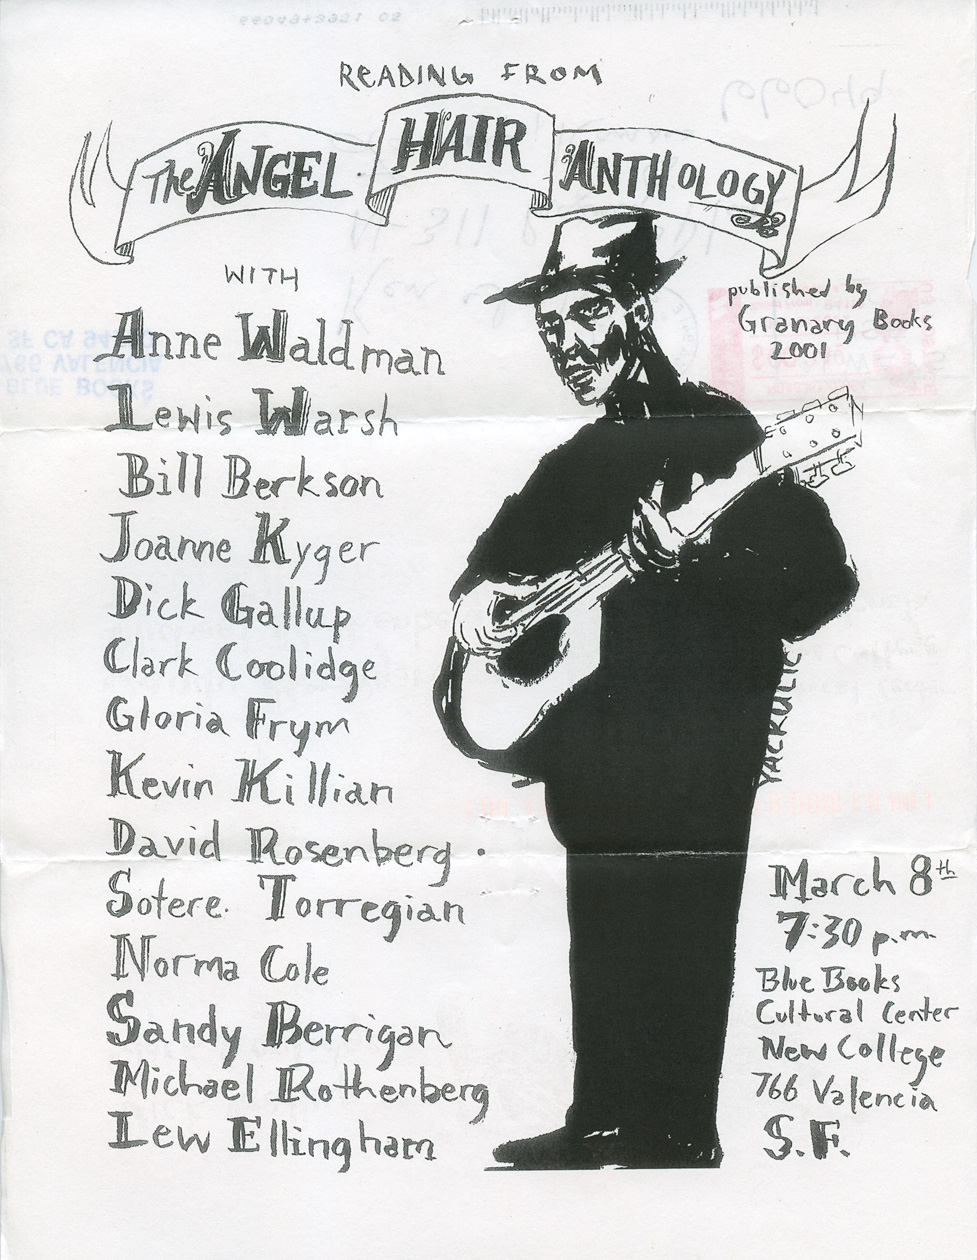 Flyer for a reading from The Angel Hair Anthology, published by Granary Books, at Blue Books Cultural Center, New College, San Francisco, [2002?].